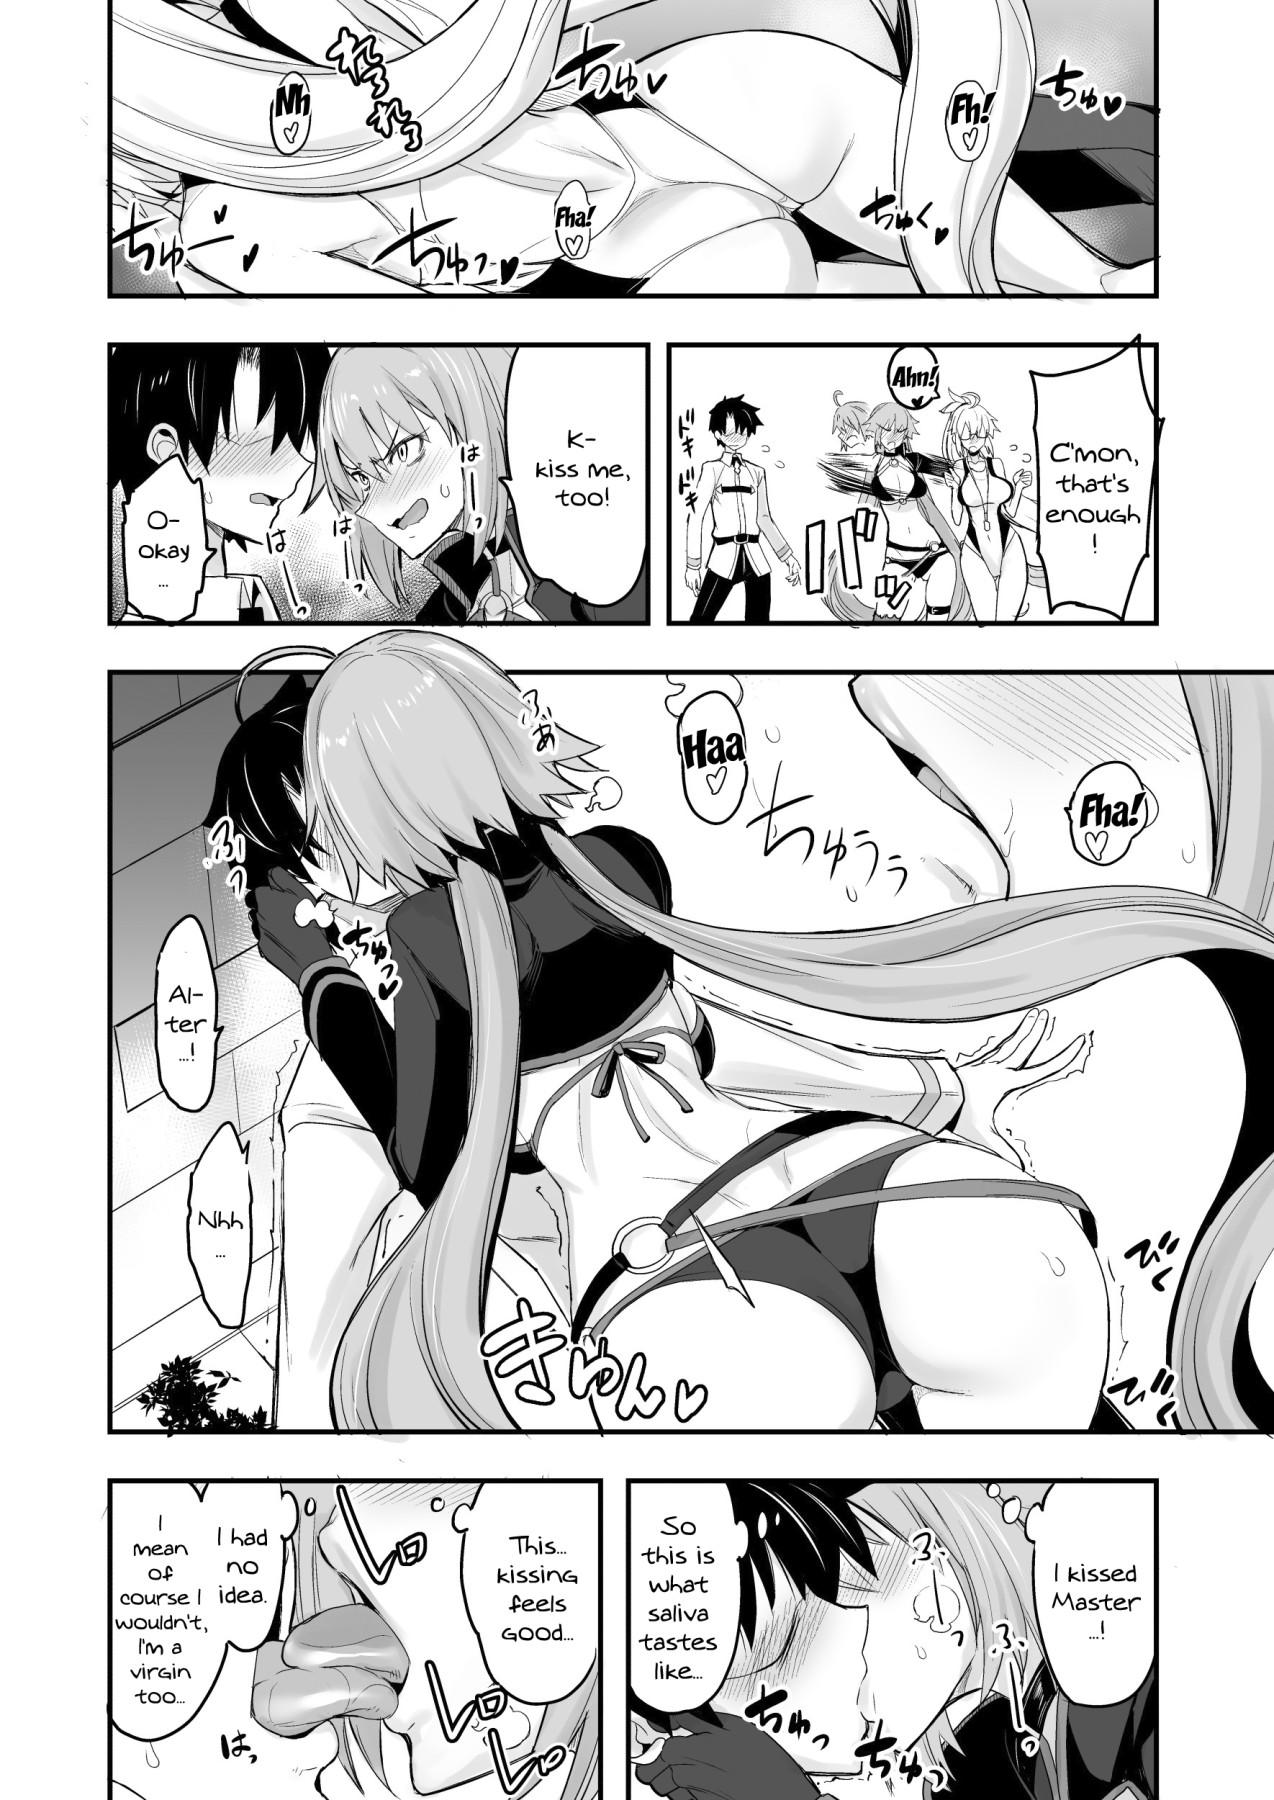 Dirty w jeanne vs master - Fate grand order Amazing - Page 5